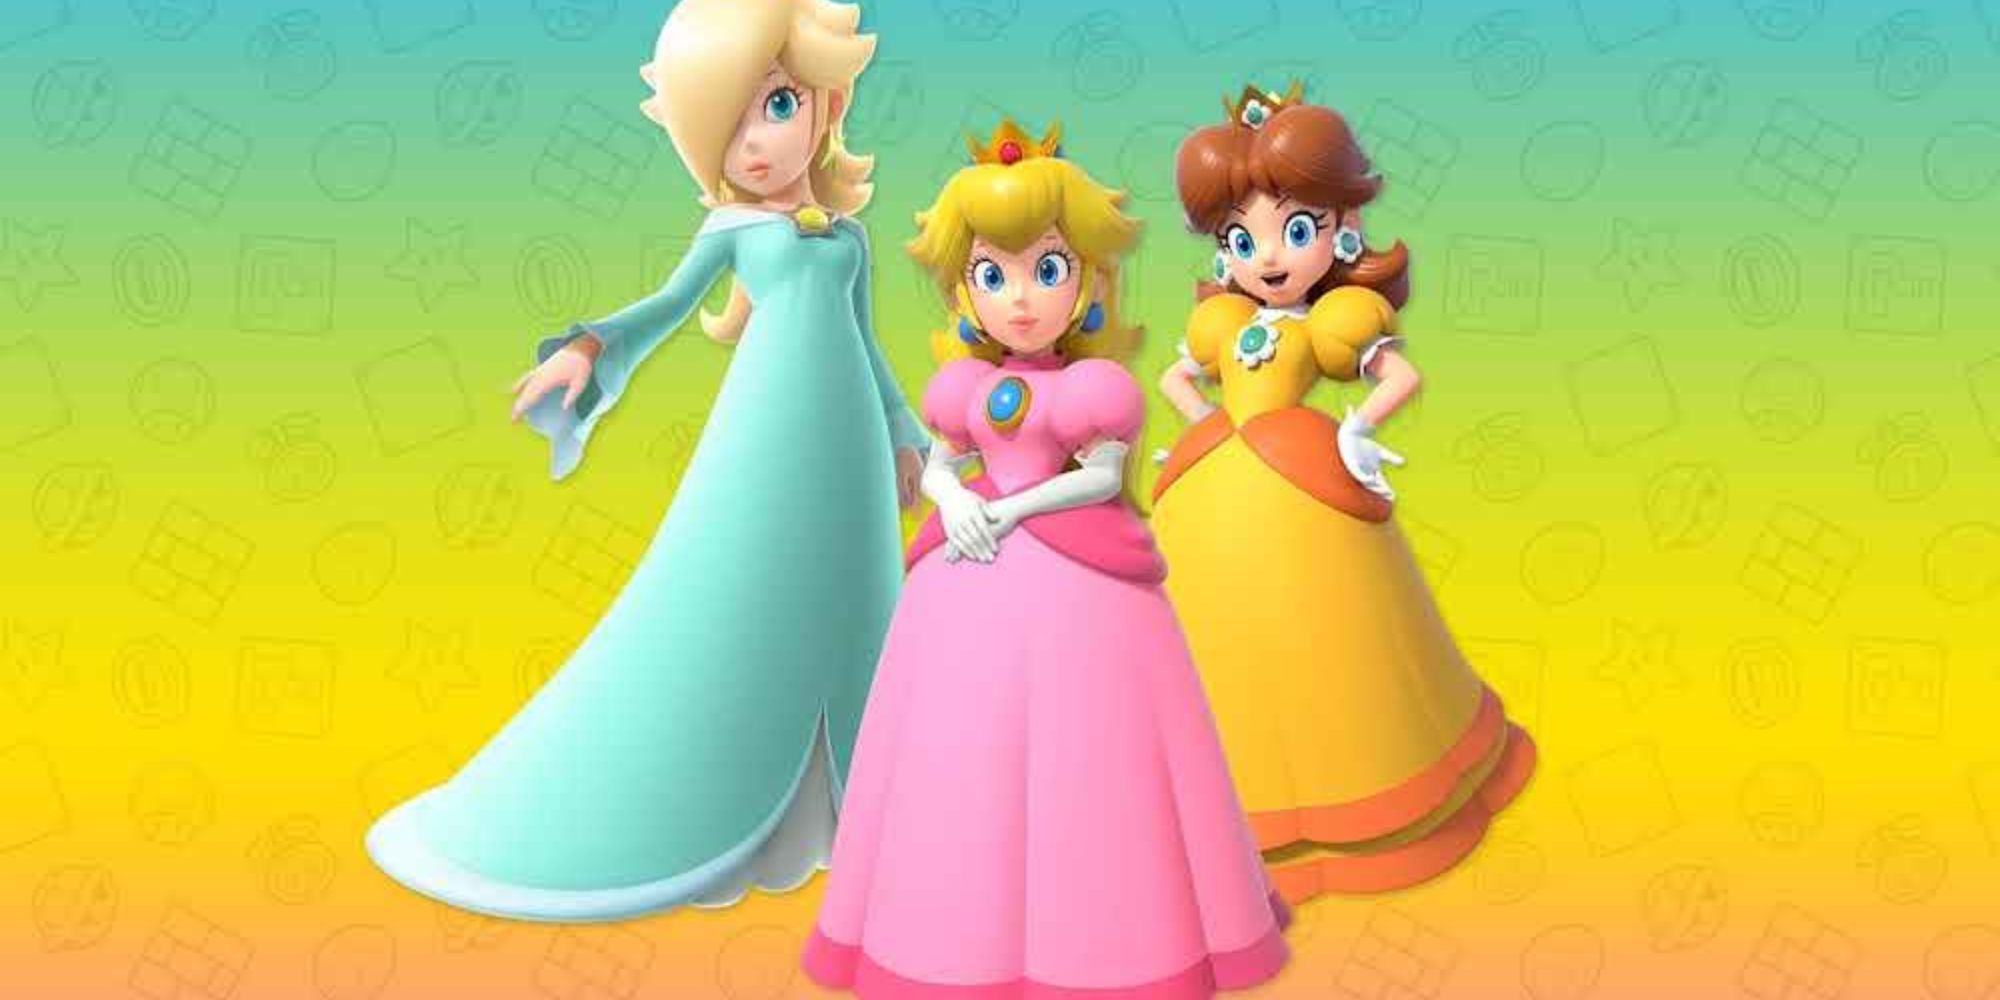 mario peach daisy and rosalina all psoing on a colorful background